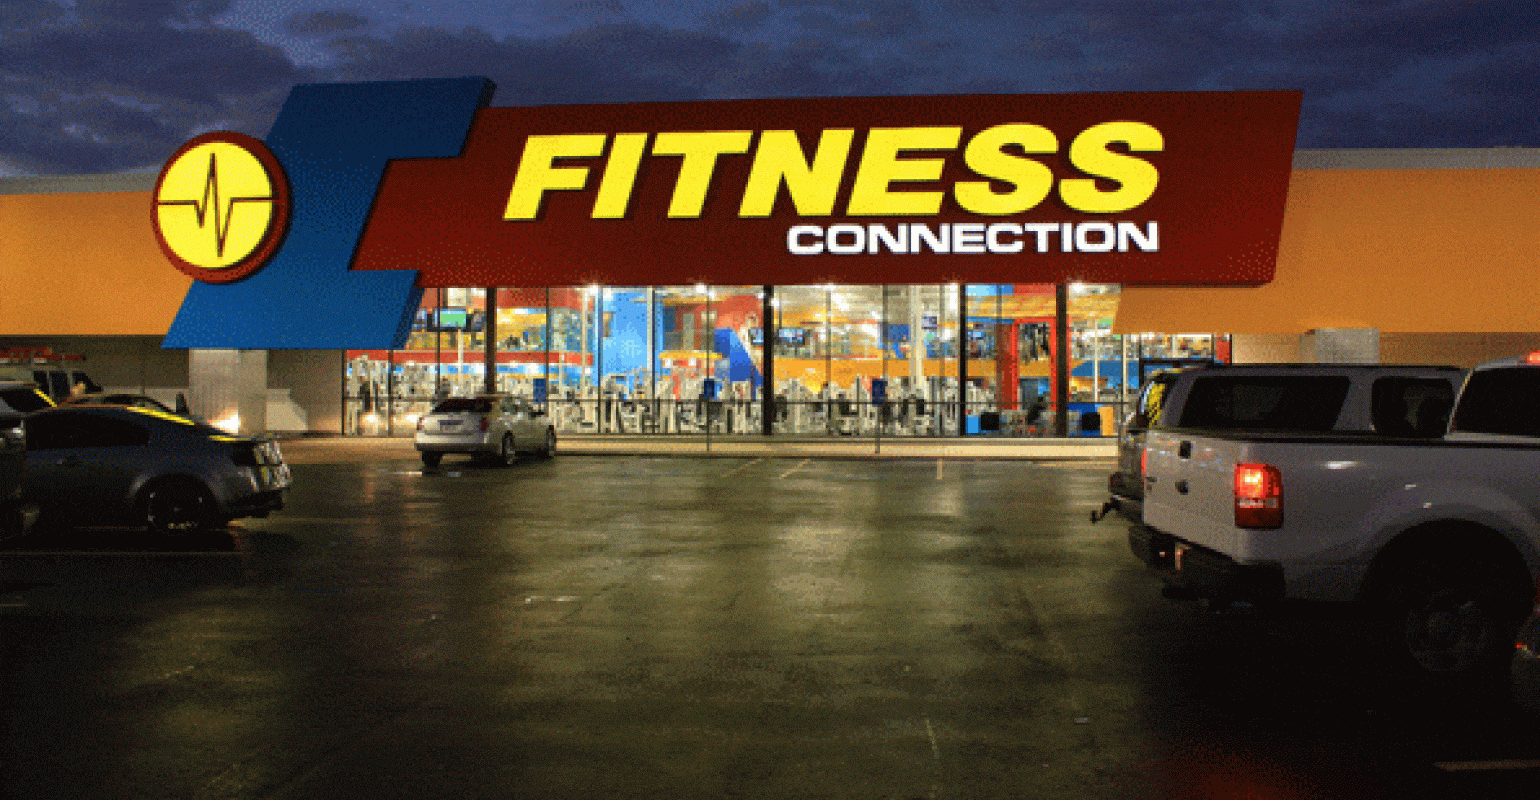 fitness connection hours north hills